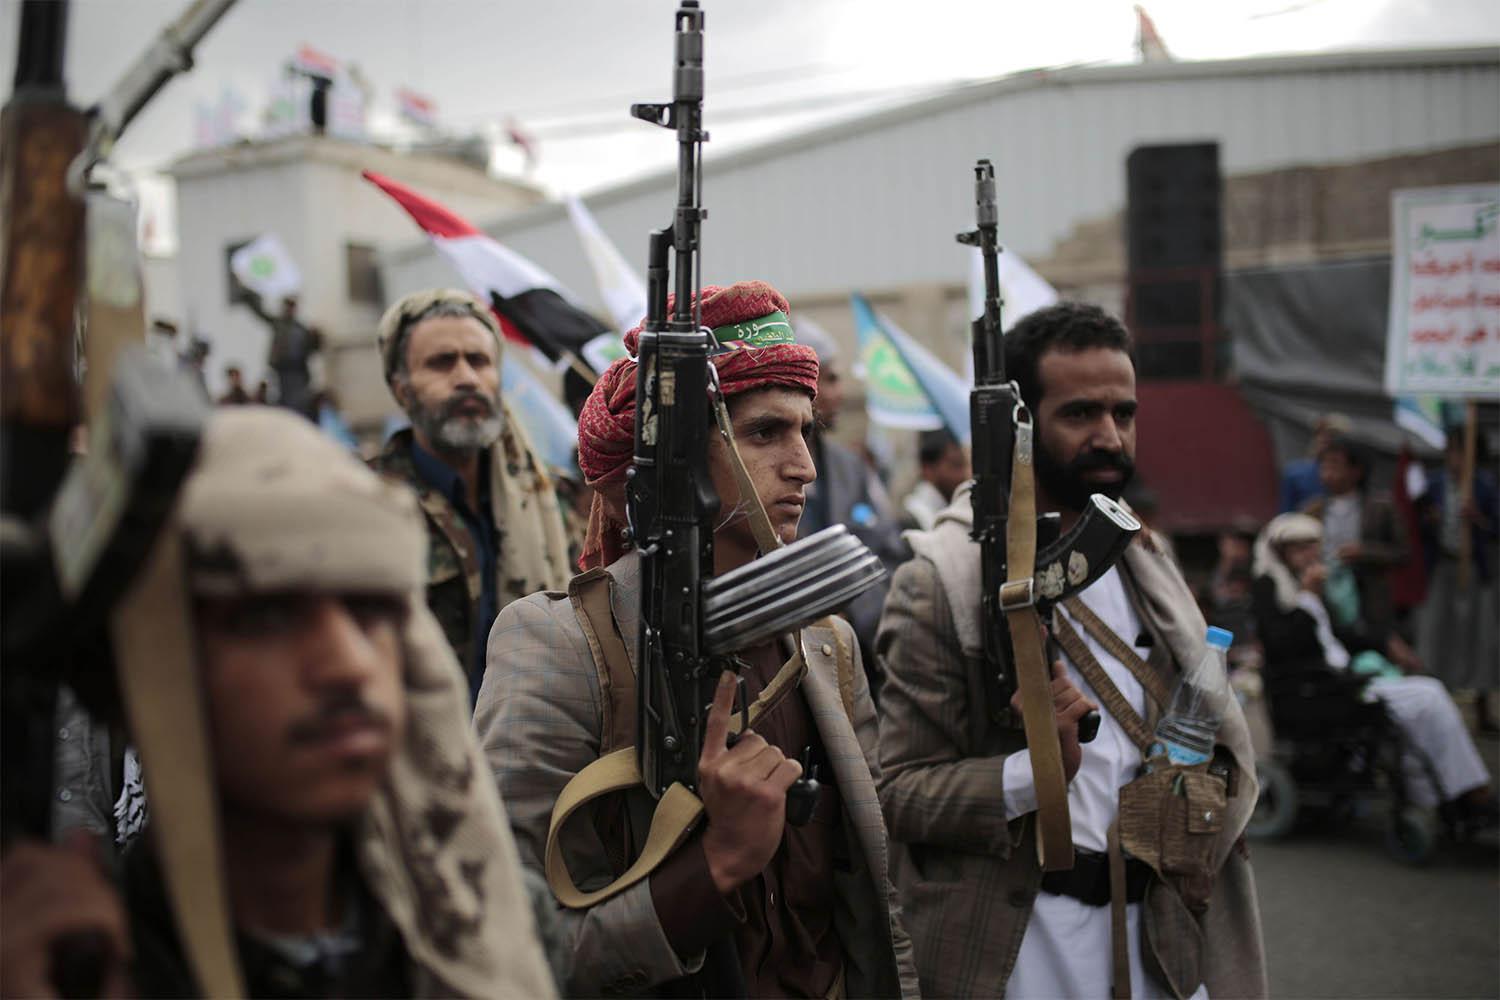 Reclassifying the Houthis as a terrorist organization will be the most effective response to these violent extremists